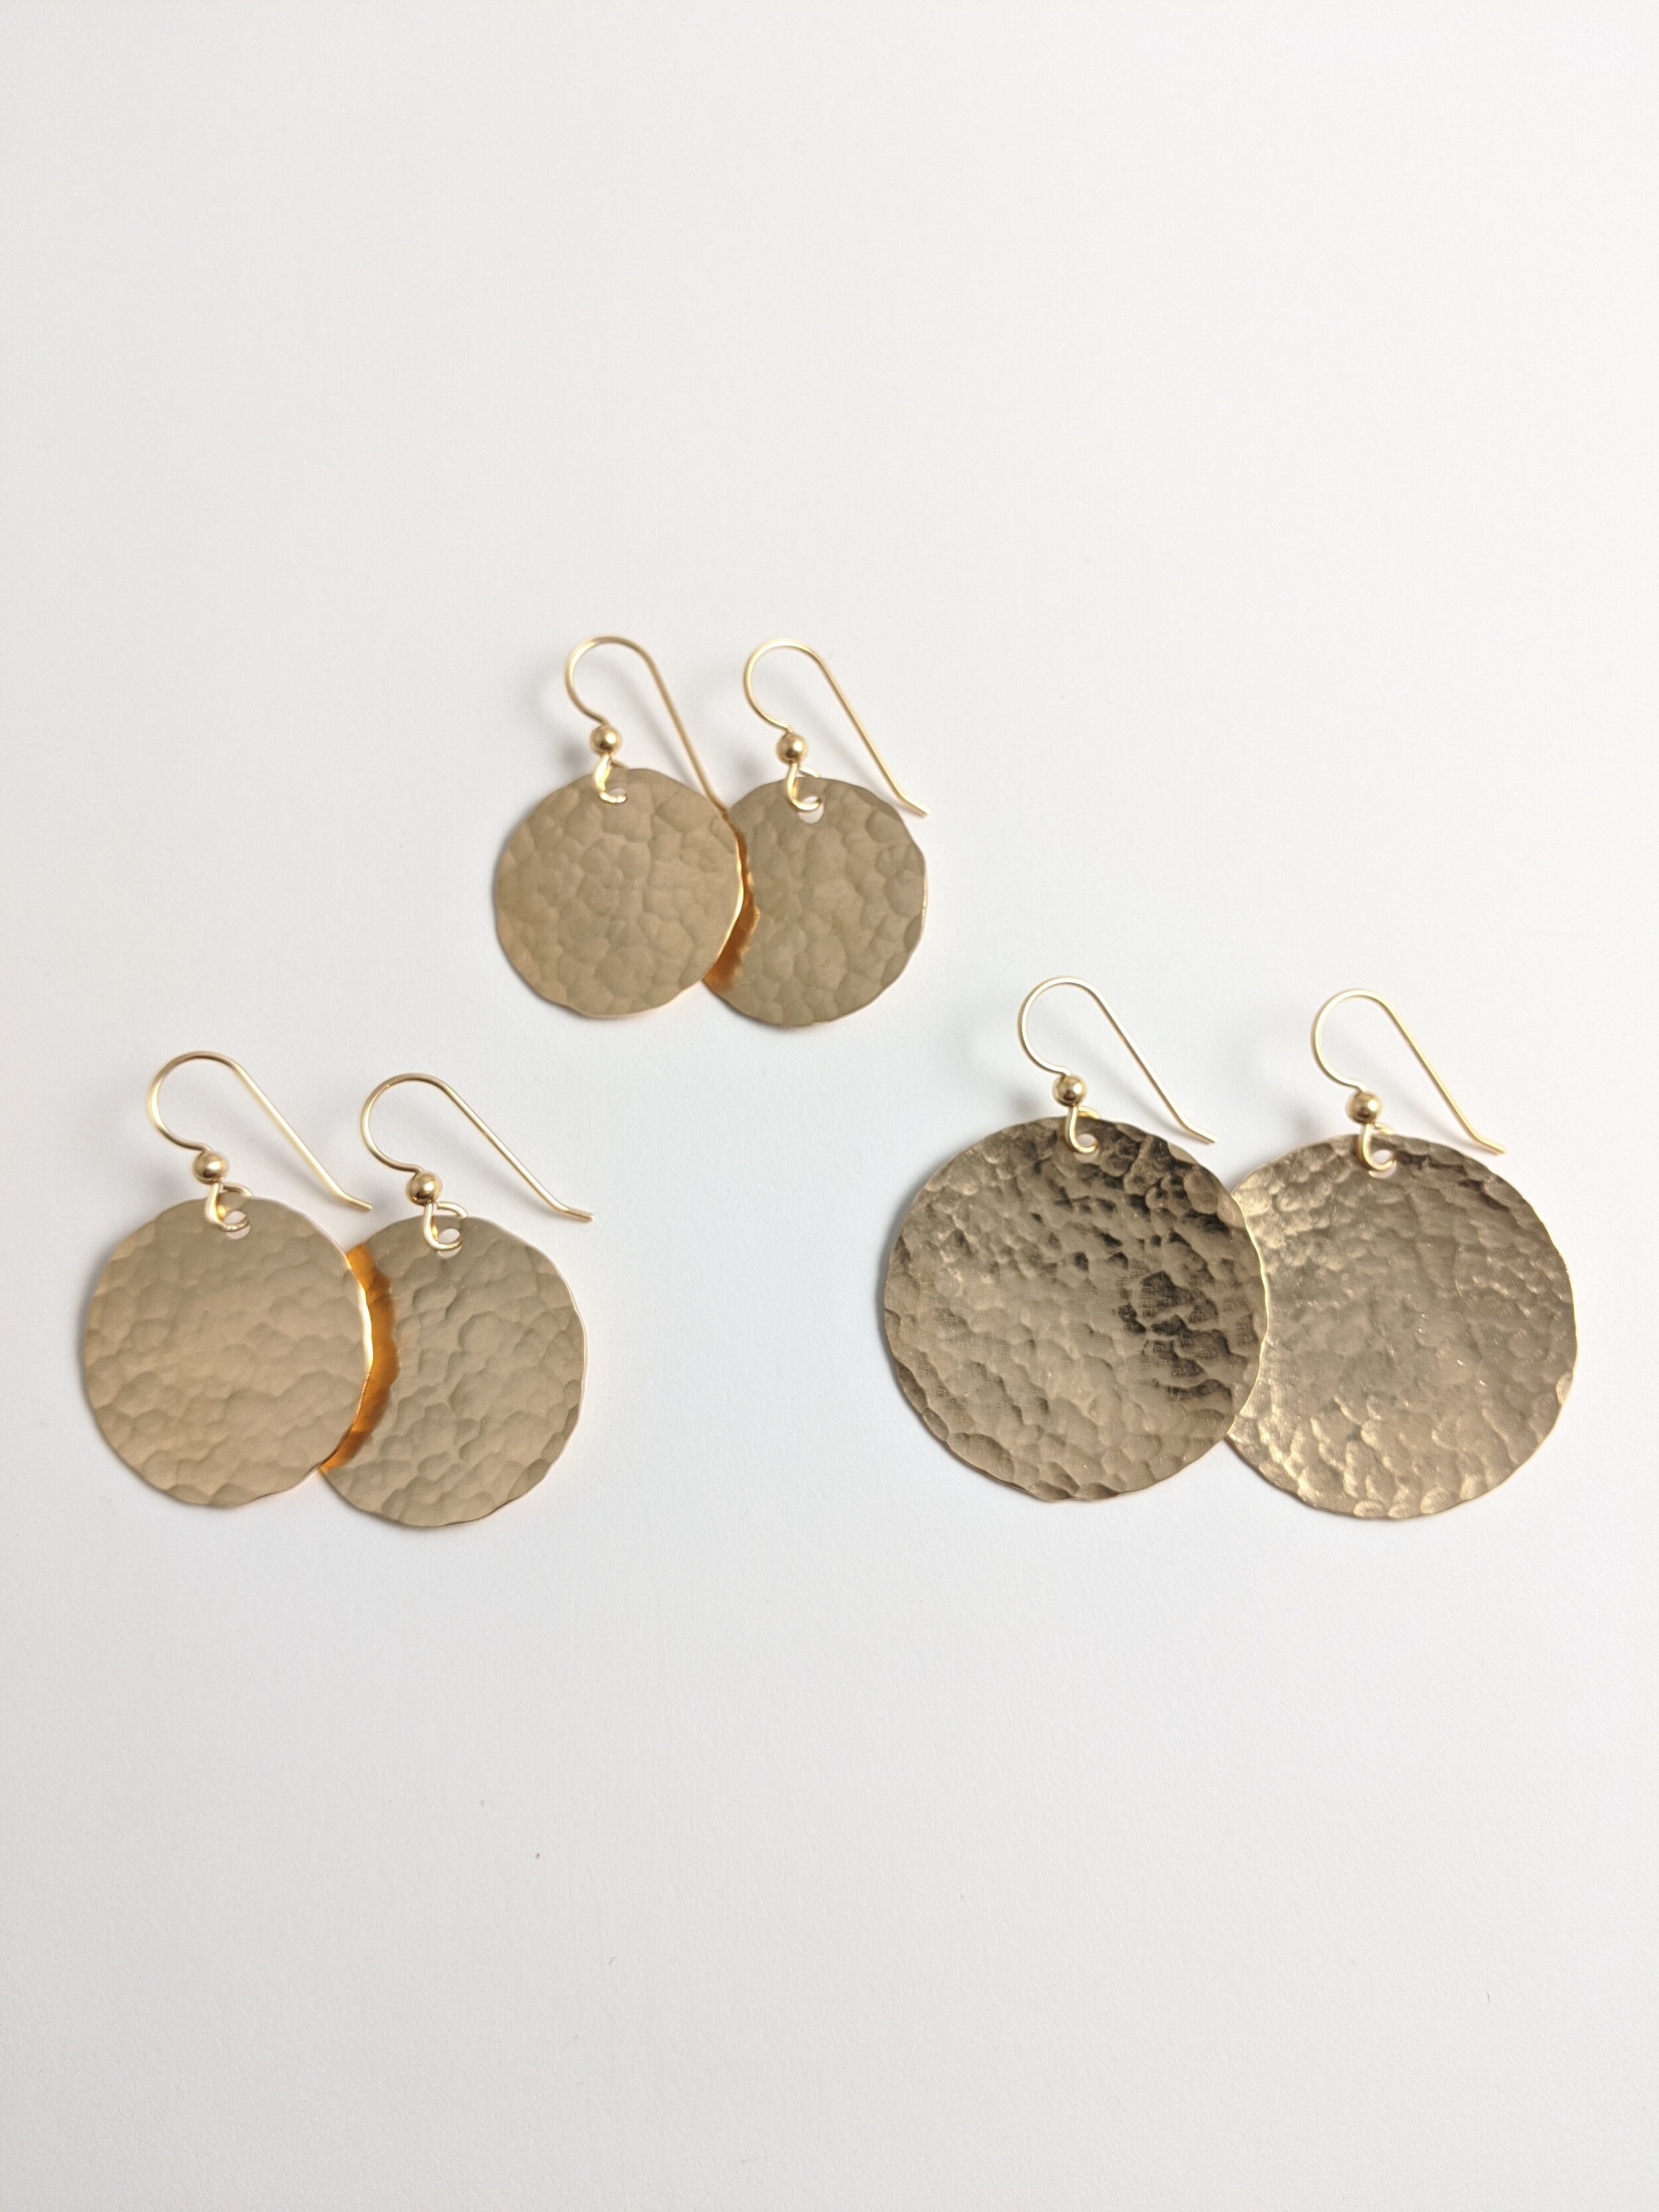 14K Yellow Gold Hammered Disc Earrings - RioGrande